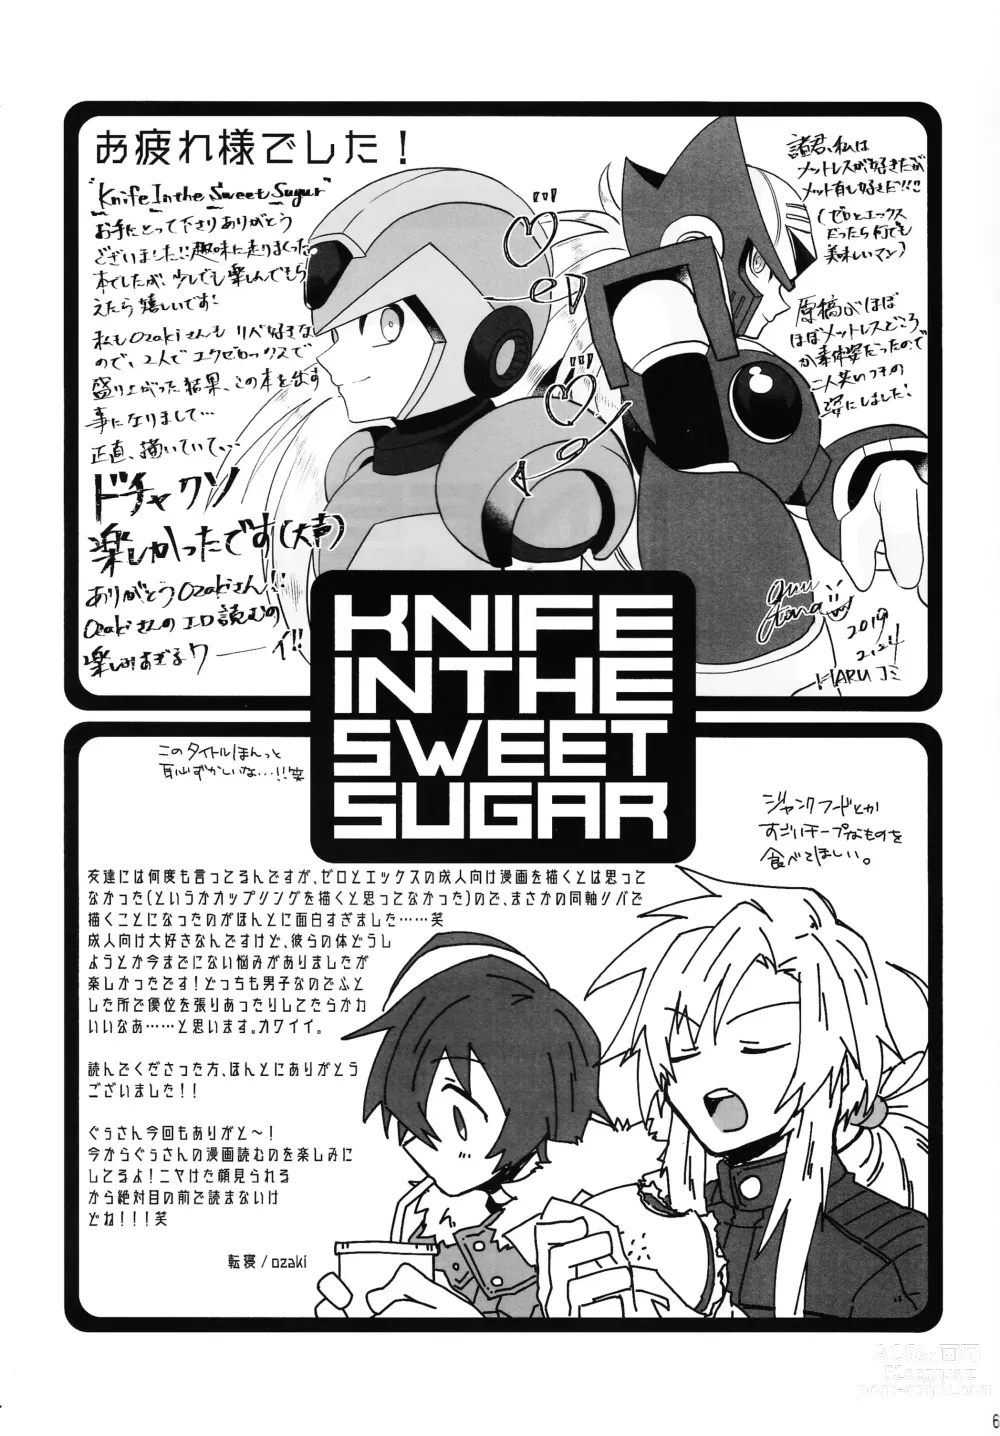 Page 62 of doujinshi KNIFE IN THE SWEET SUGAR